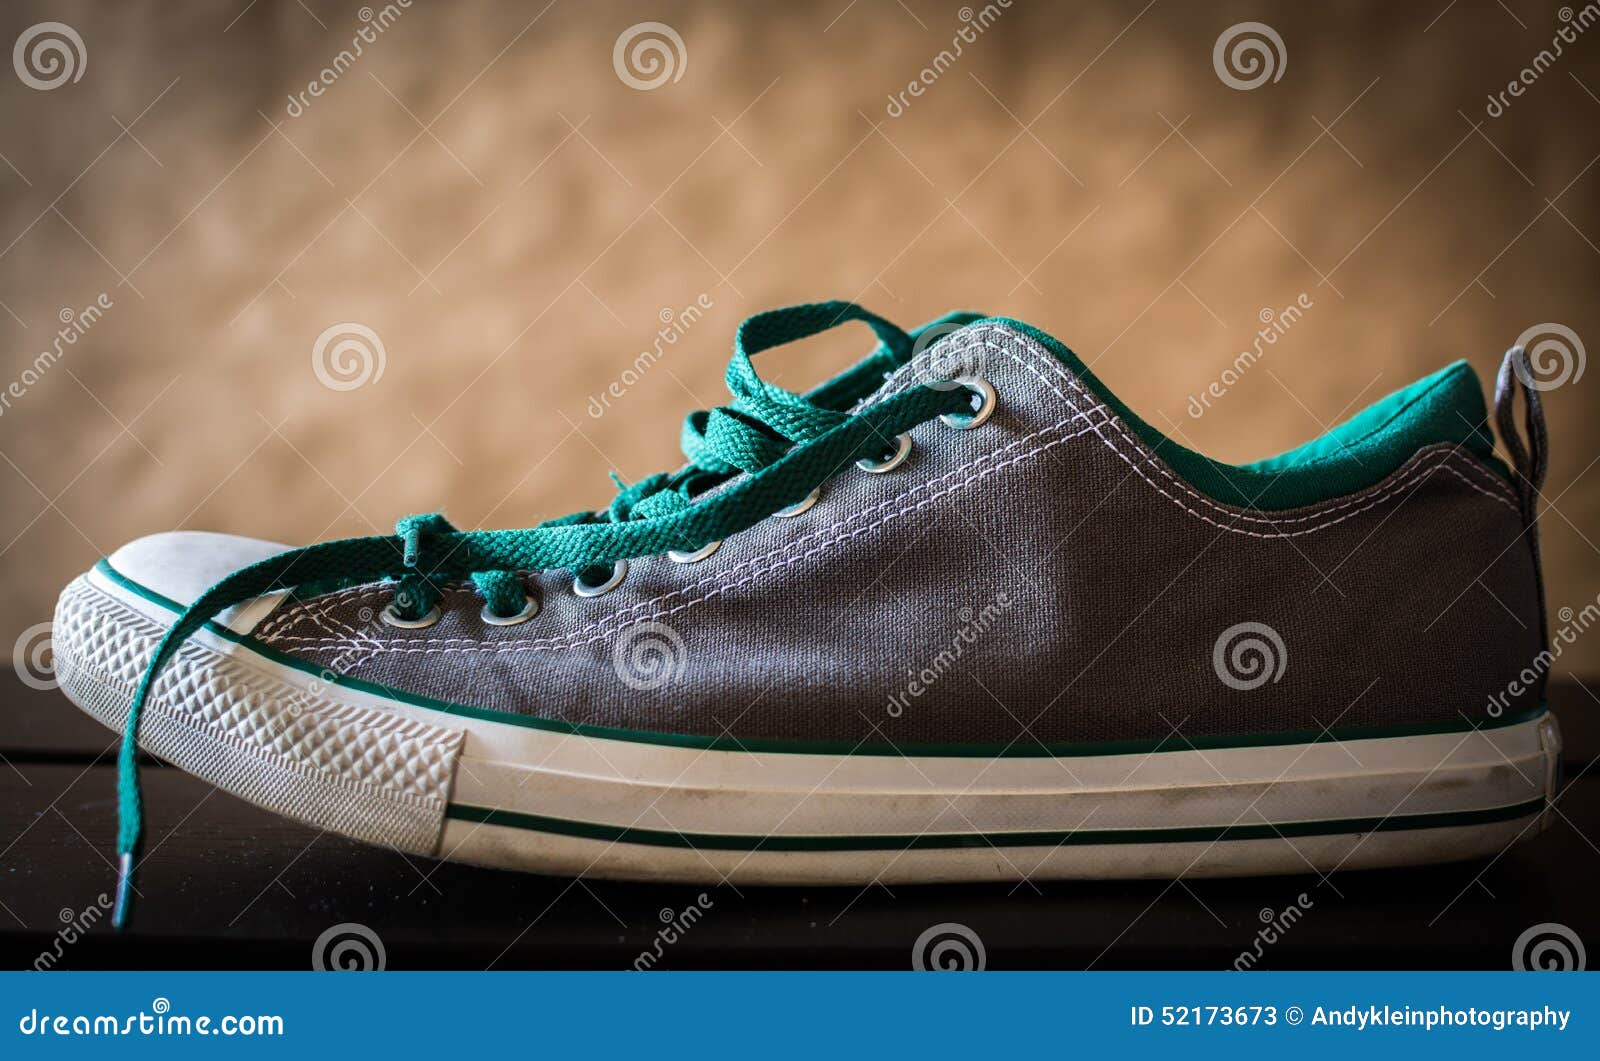 Shoe product shot stock image. Image of runners, sneakers - 52173673